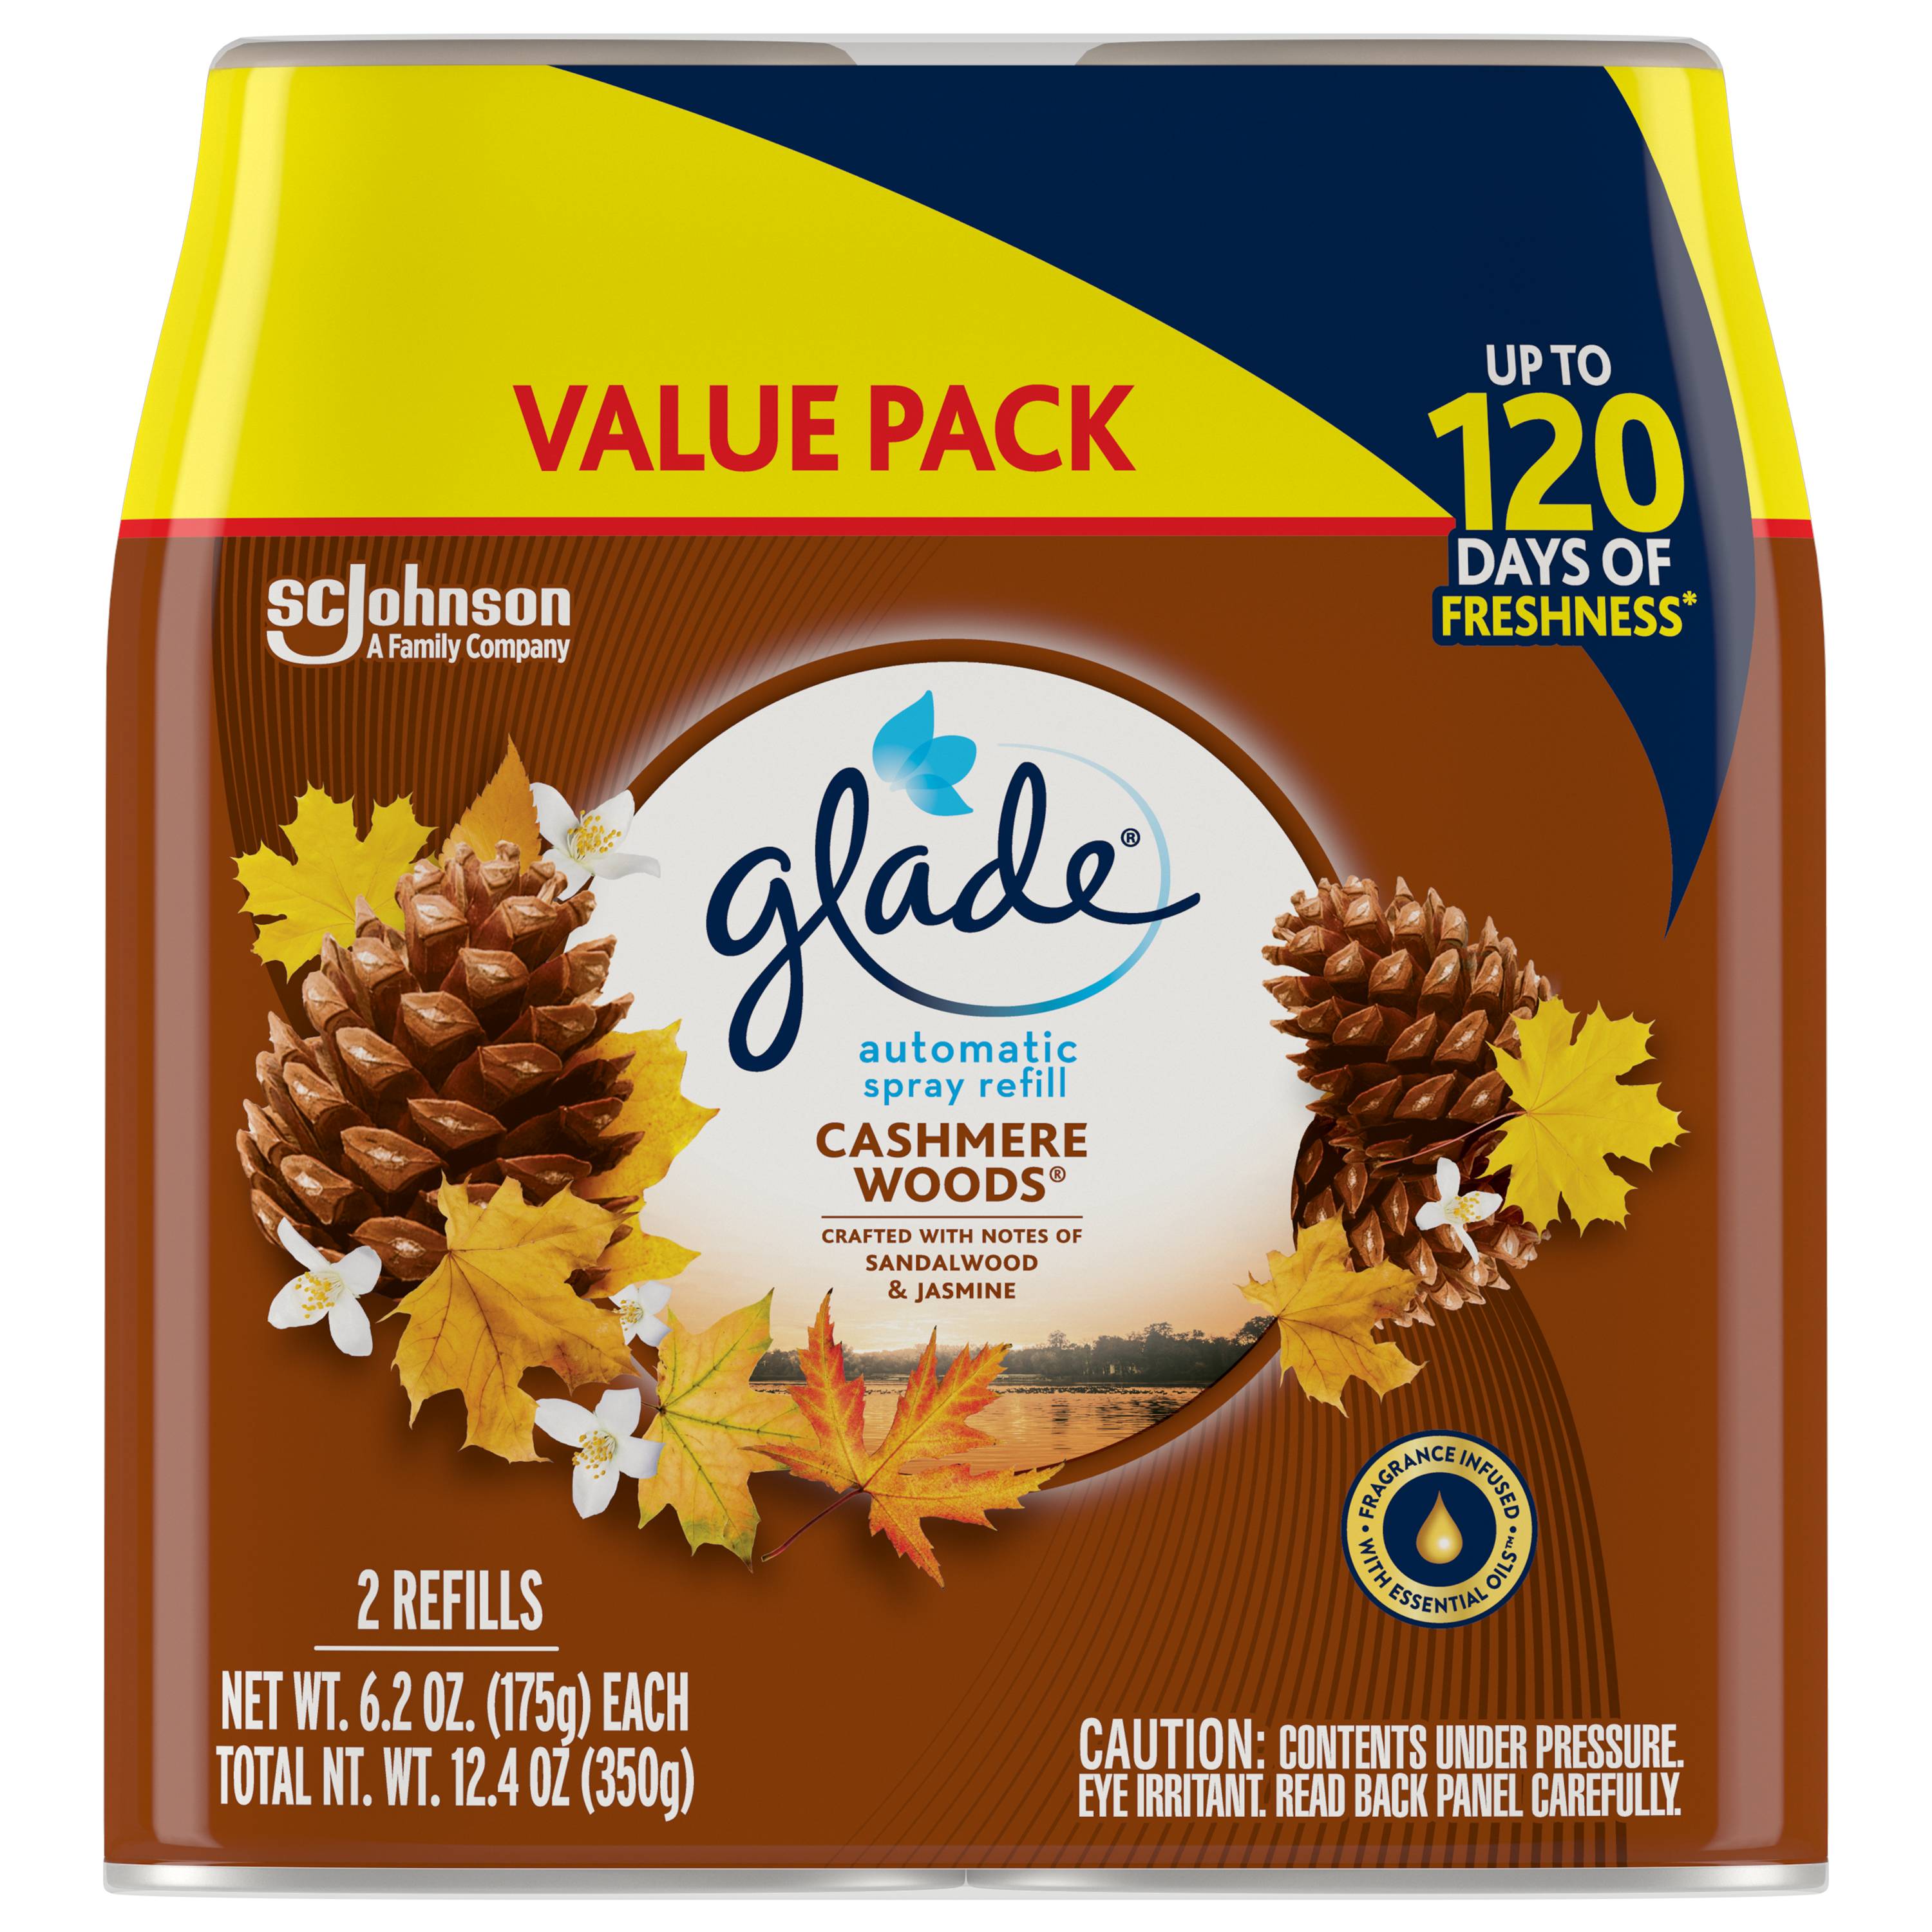 Glade Automatic Spray Refill Air Freshener 6.2 oz - Cashmere Woods